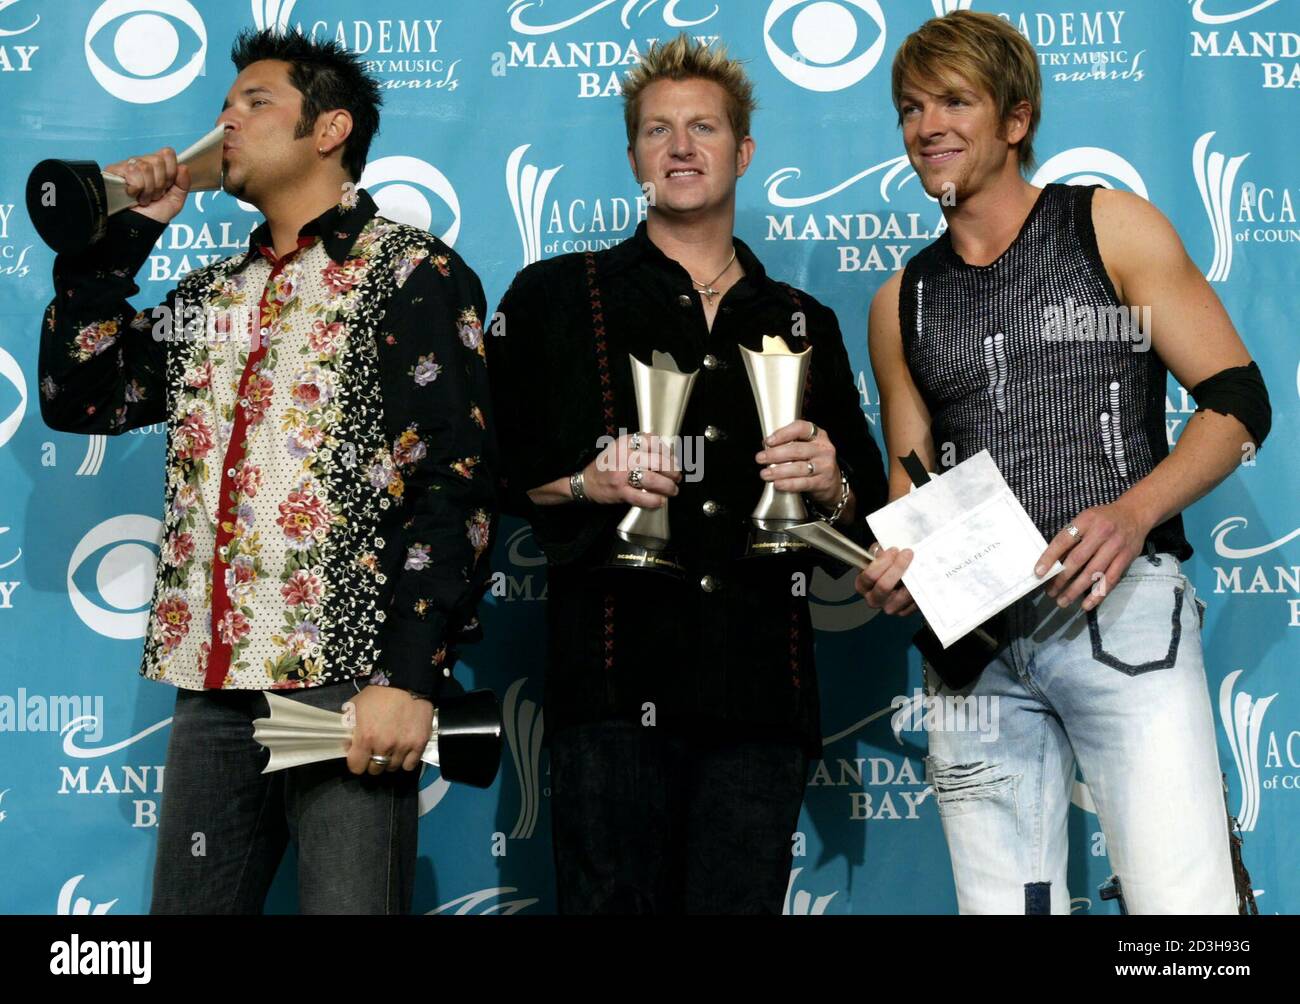 Members of the band Rascal Flatts pose with awards during the 38th Annual Academy of Country Music Awards show at the Mandalay Bay Resort  & Casino in Las Vegas, Nevada May 21, 2003. From L-R, Jay DeMarcus, Gary LeVox and Joe Don Rooney. The group won awards for Top Vocal Group and for Song of the Year -'I'm Movin'On. Stock Photo